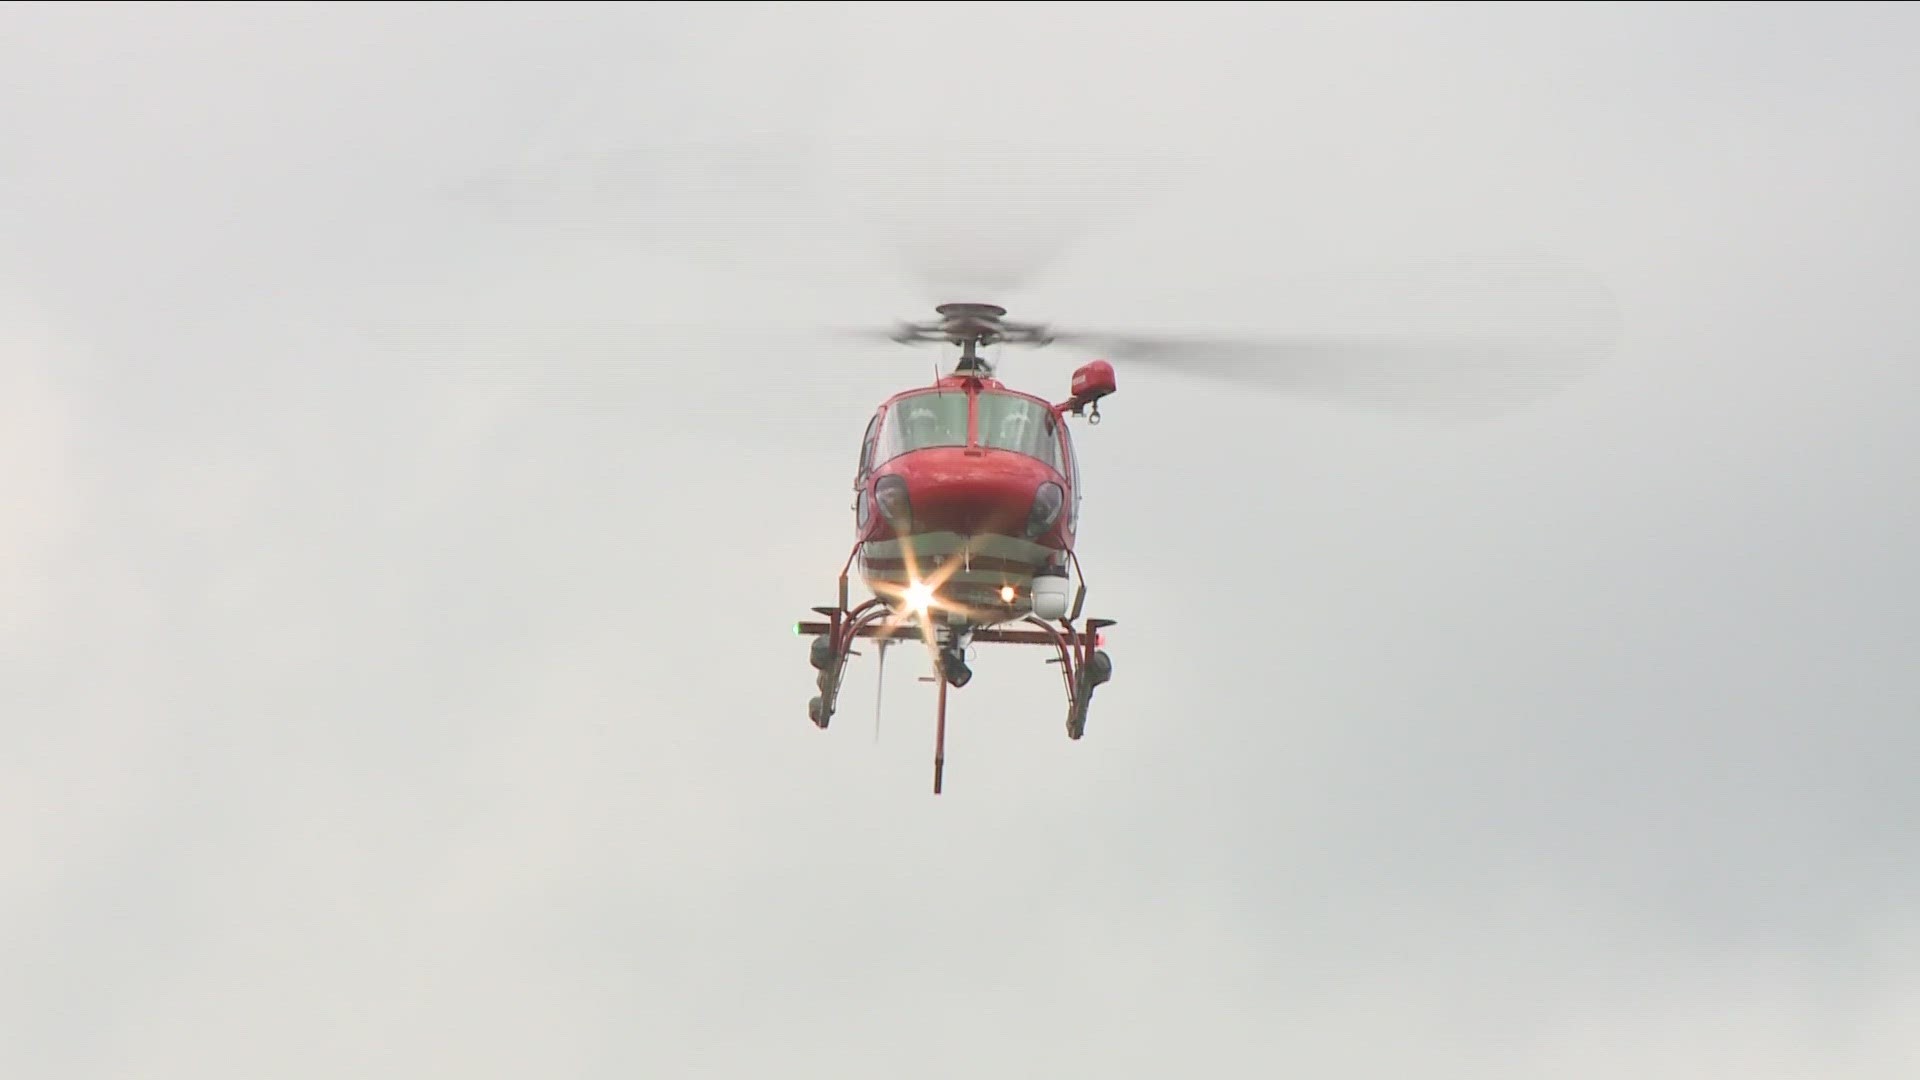 erie county's air one helicopter helping with crimes. in fact, it's what helped with the arrest of two 20-year-old's for stealing a dodge durango yesterday.